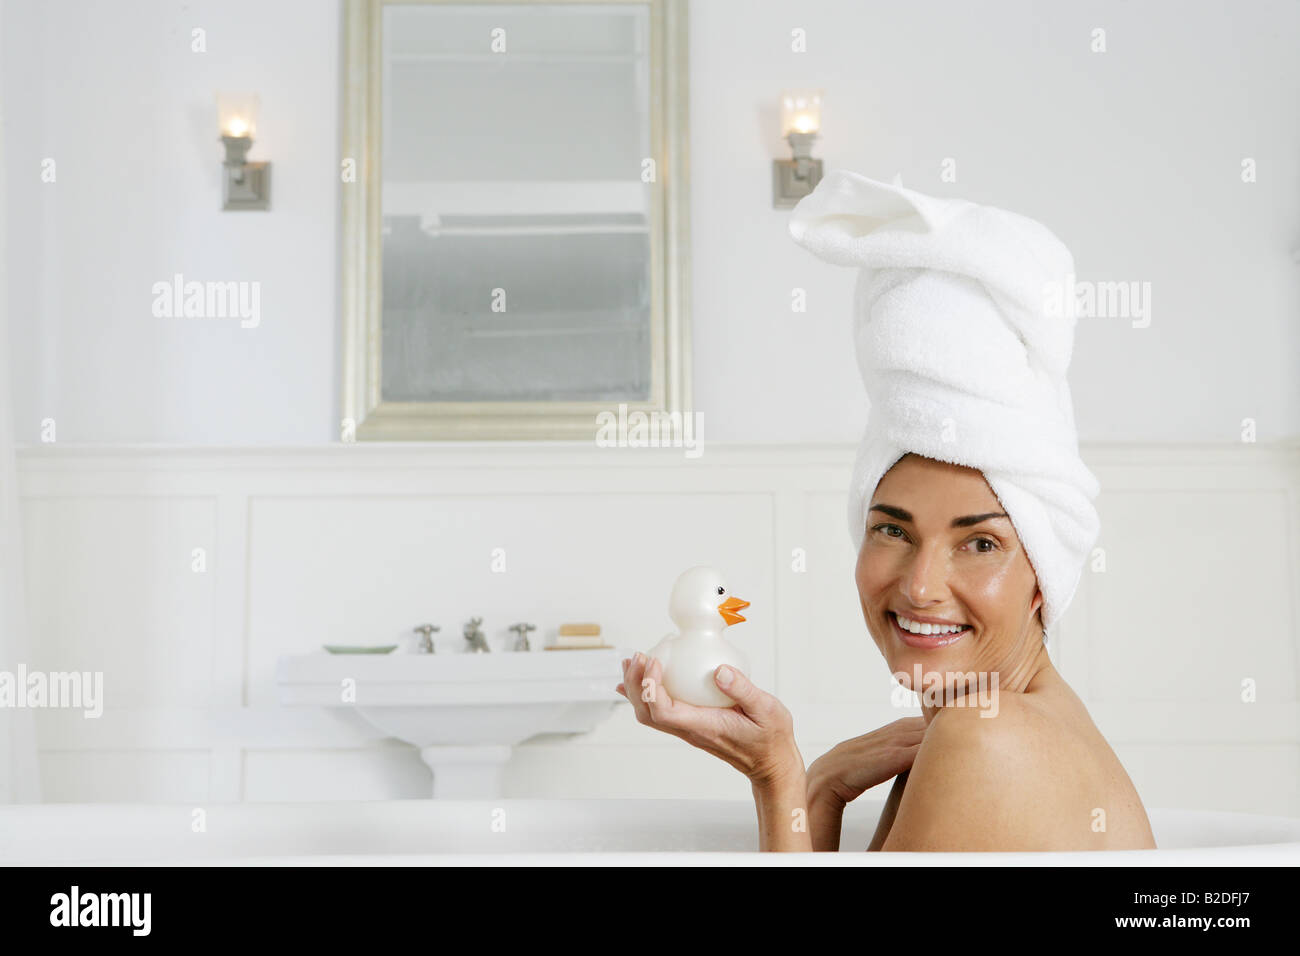 Woman in bathtub holding rubber duck. Stock Photo